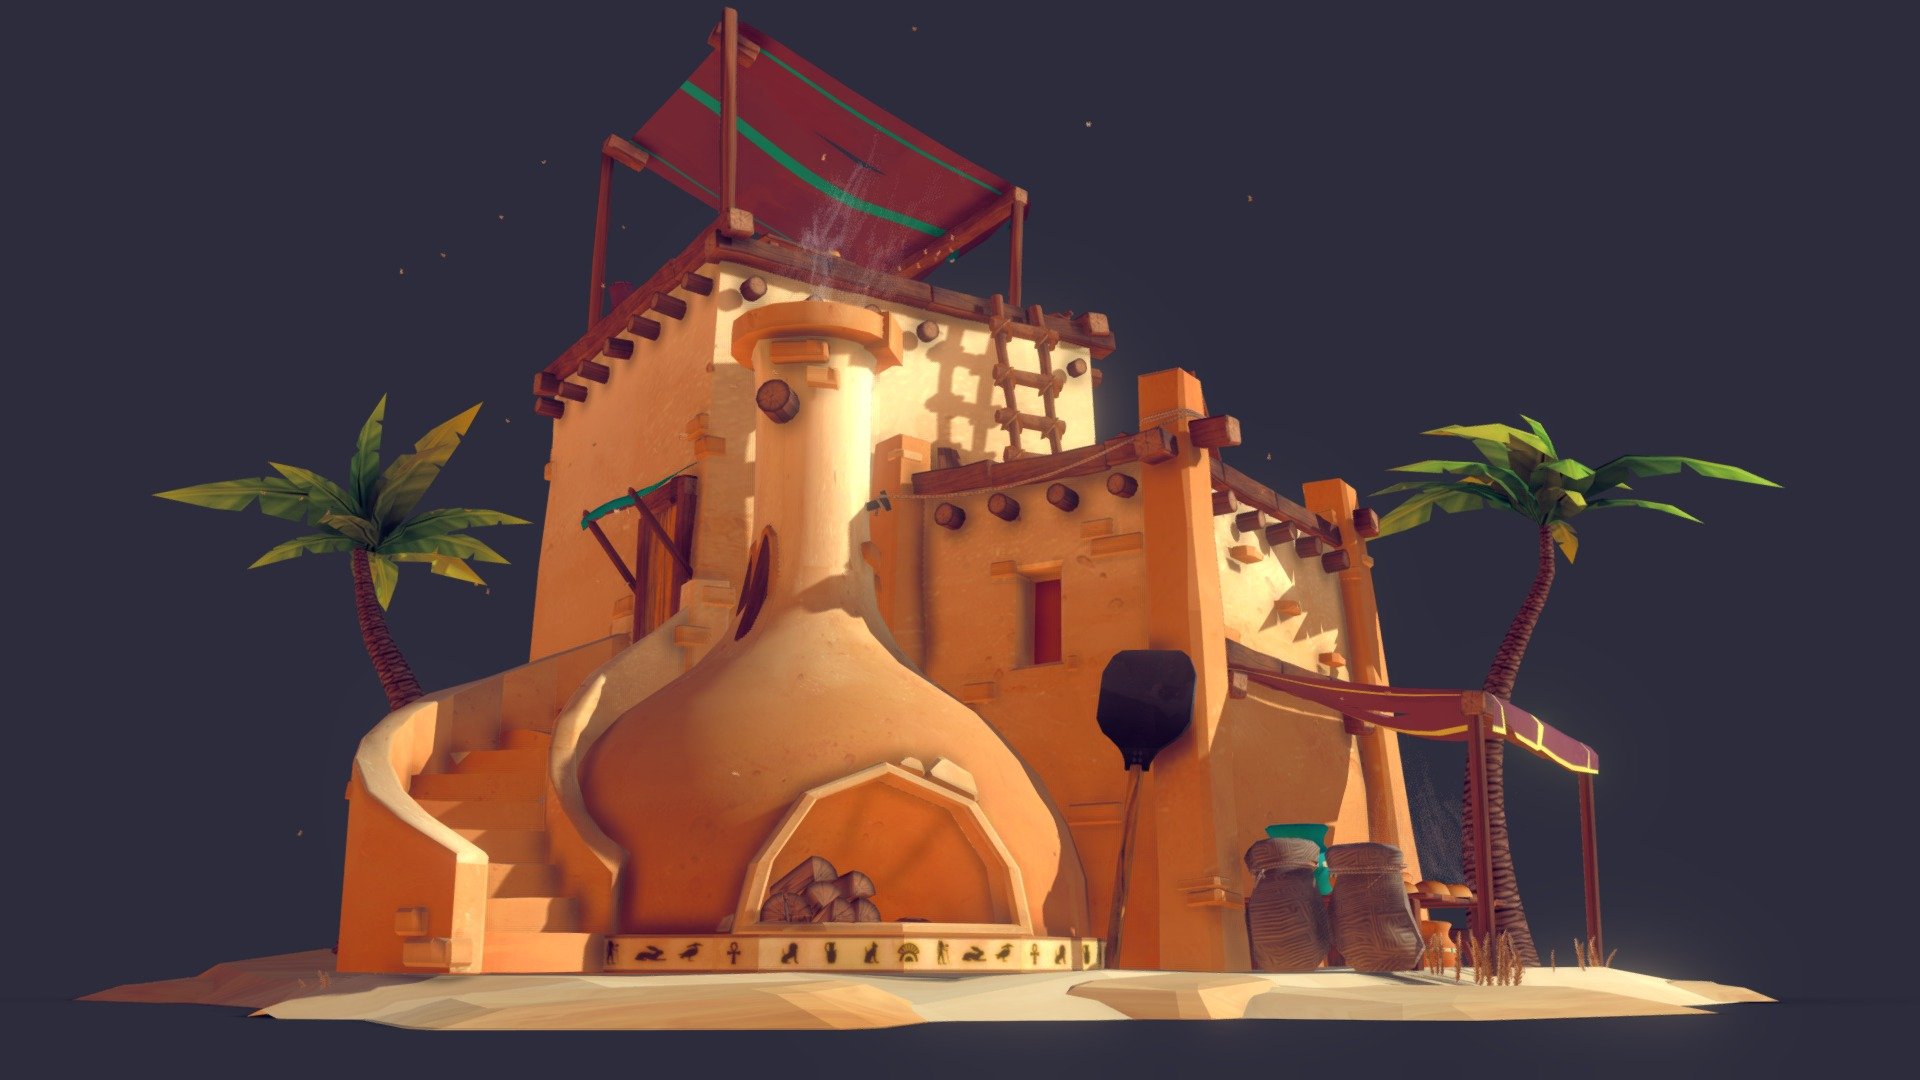 Stylied 3D Environment inspired from ancinent egypt.

Modelled In Blender, Textured in Photoshop 3d model